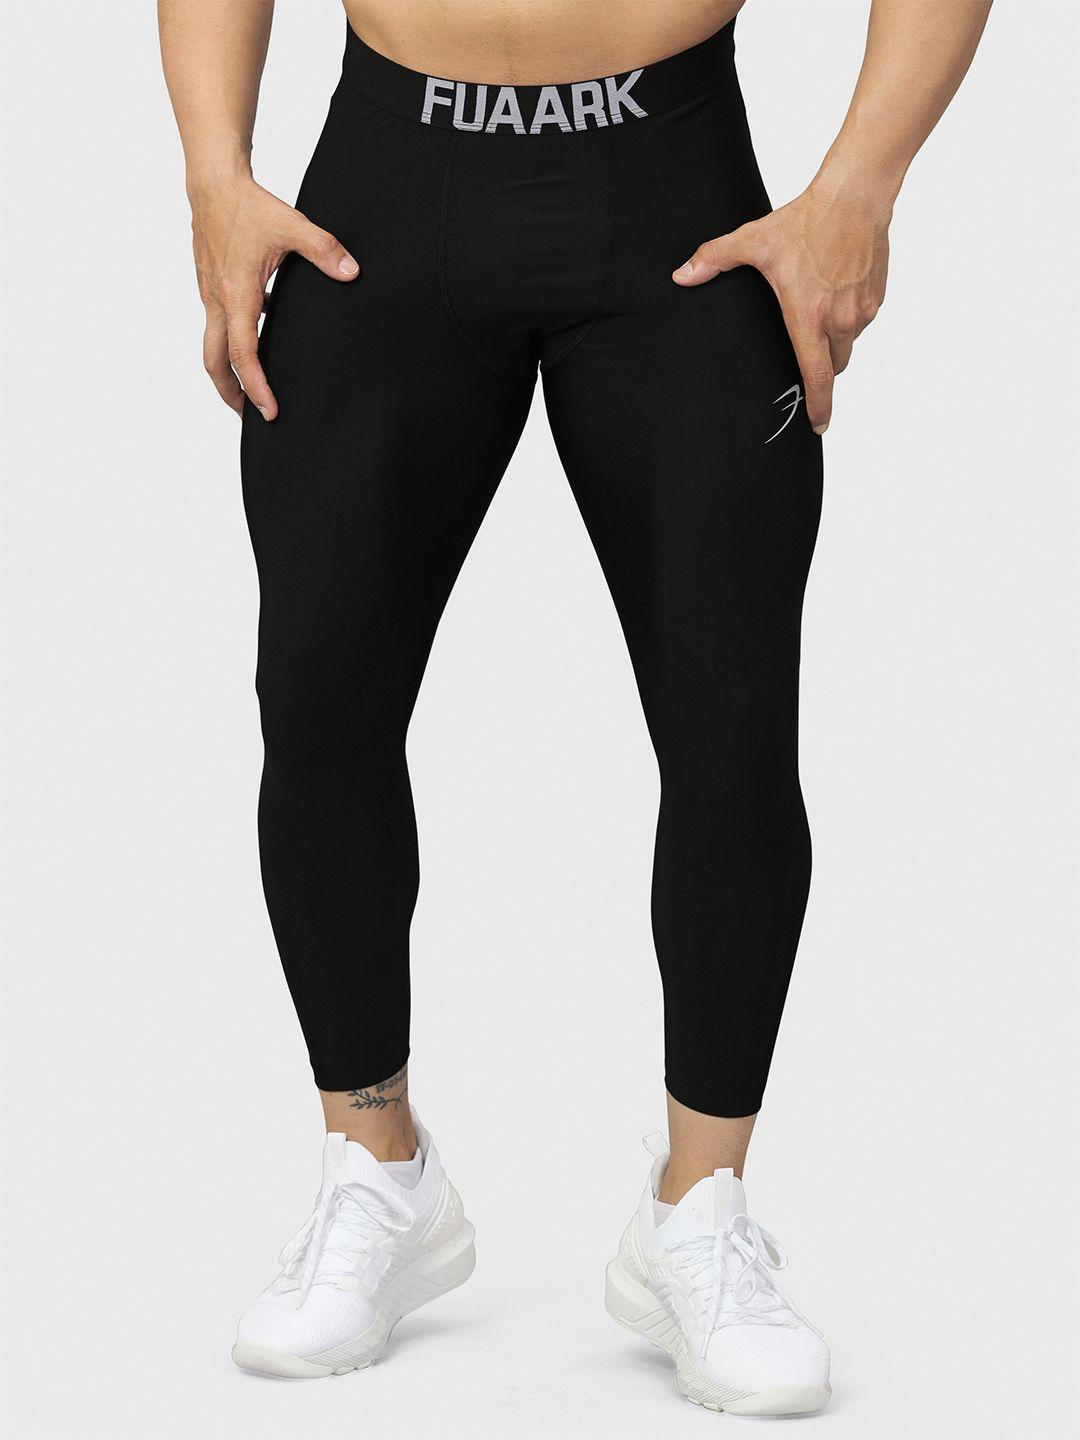 fuaark men dry fit compression tights